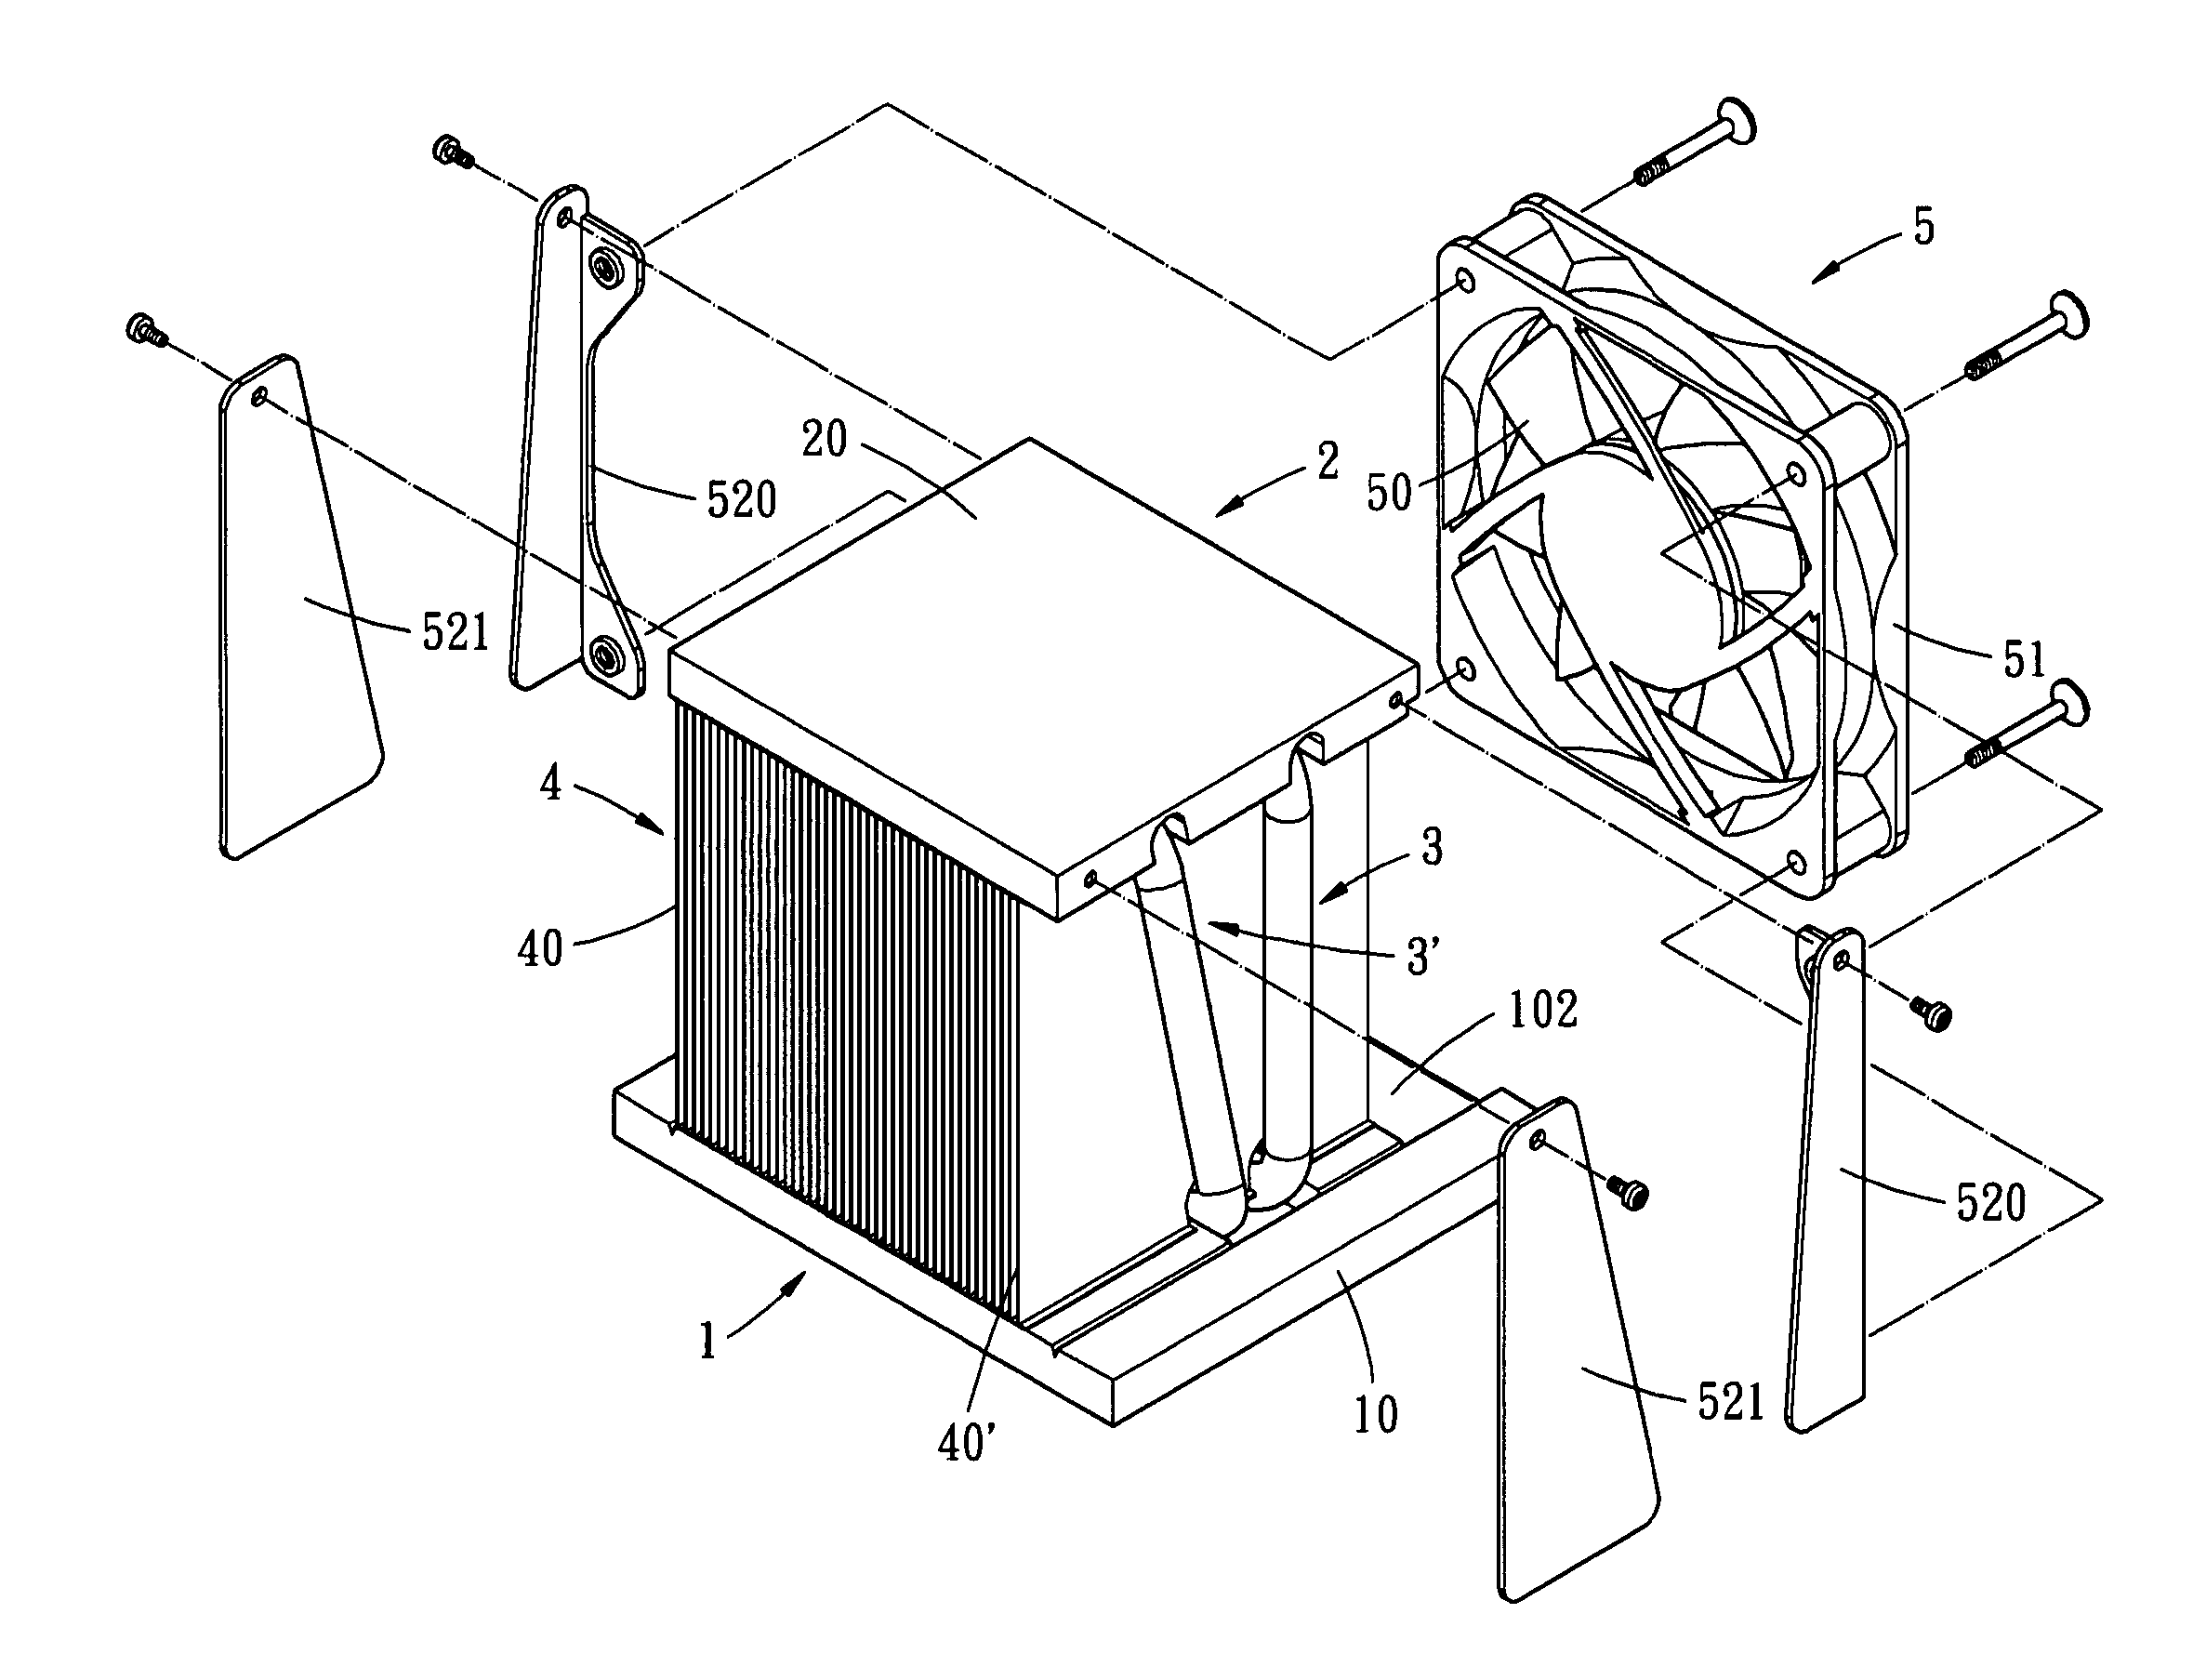 Heat dissipating device with uniform heat points